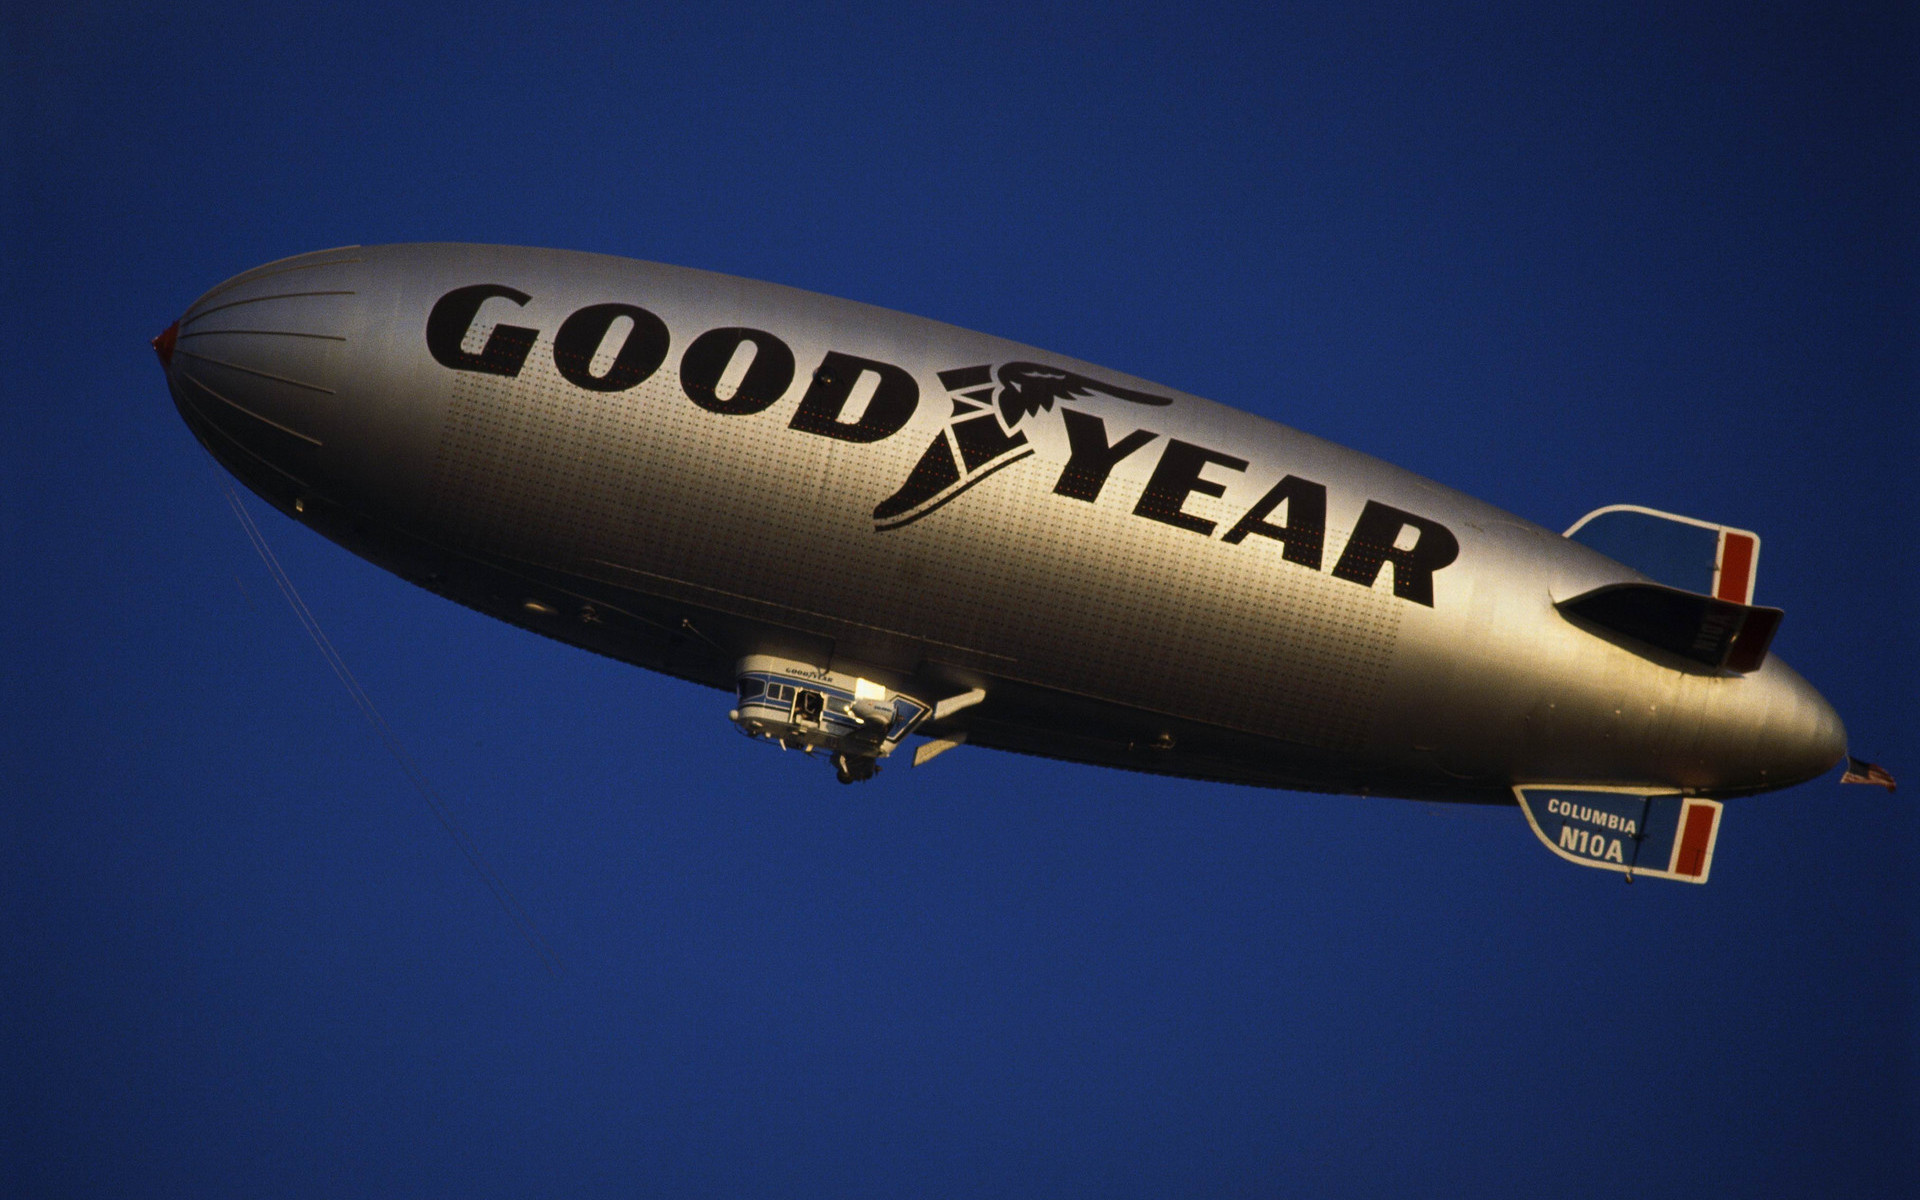 Dirigible: Aviation, The airship, Goodyear Blimp, Uses a heated lifting gas. 1920x1200 HD Background.